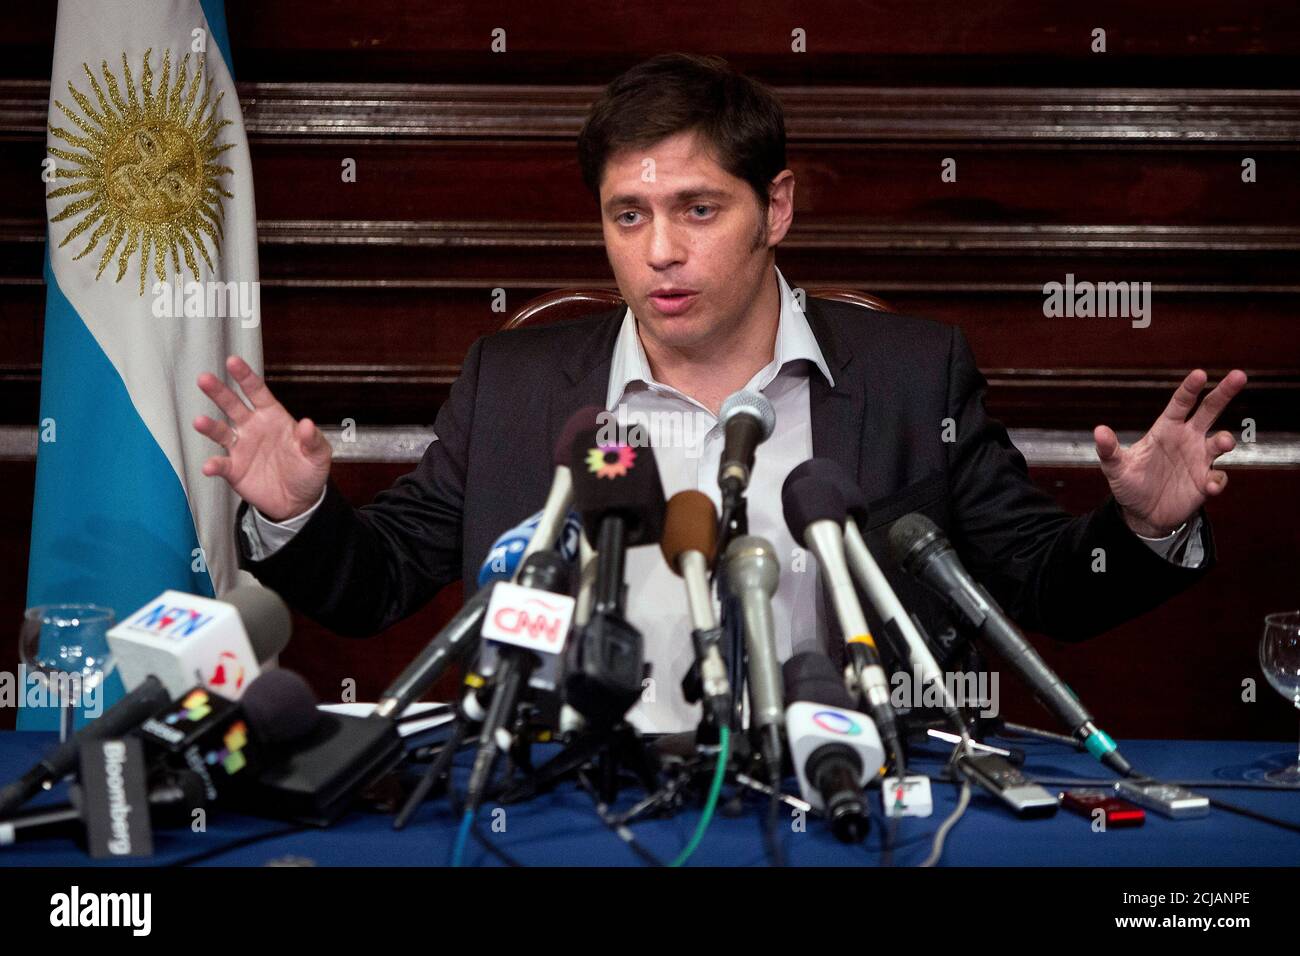 Argentina's Economy Minister Axel Kicillof speaks to the media at a press conference at the Argentine Consulate in New York July 30, 2014. Kicillof on Wednesday said the country offered a group of holdout creditors the same reduced payment terms it has agreed to pay other holders of its restructured bonds, but the holdouts refused the offer. The holdouts, a group of hedge funds that bought the bonds at a steep discount following Argentina's default on $100 billion of debt in 2002, also refused to ask a U.S. court to stay an order the blocks Argentina from paying its other creditors, Kicillof s Stock Photo